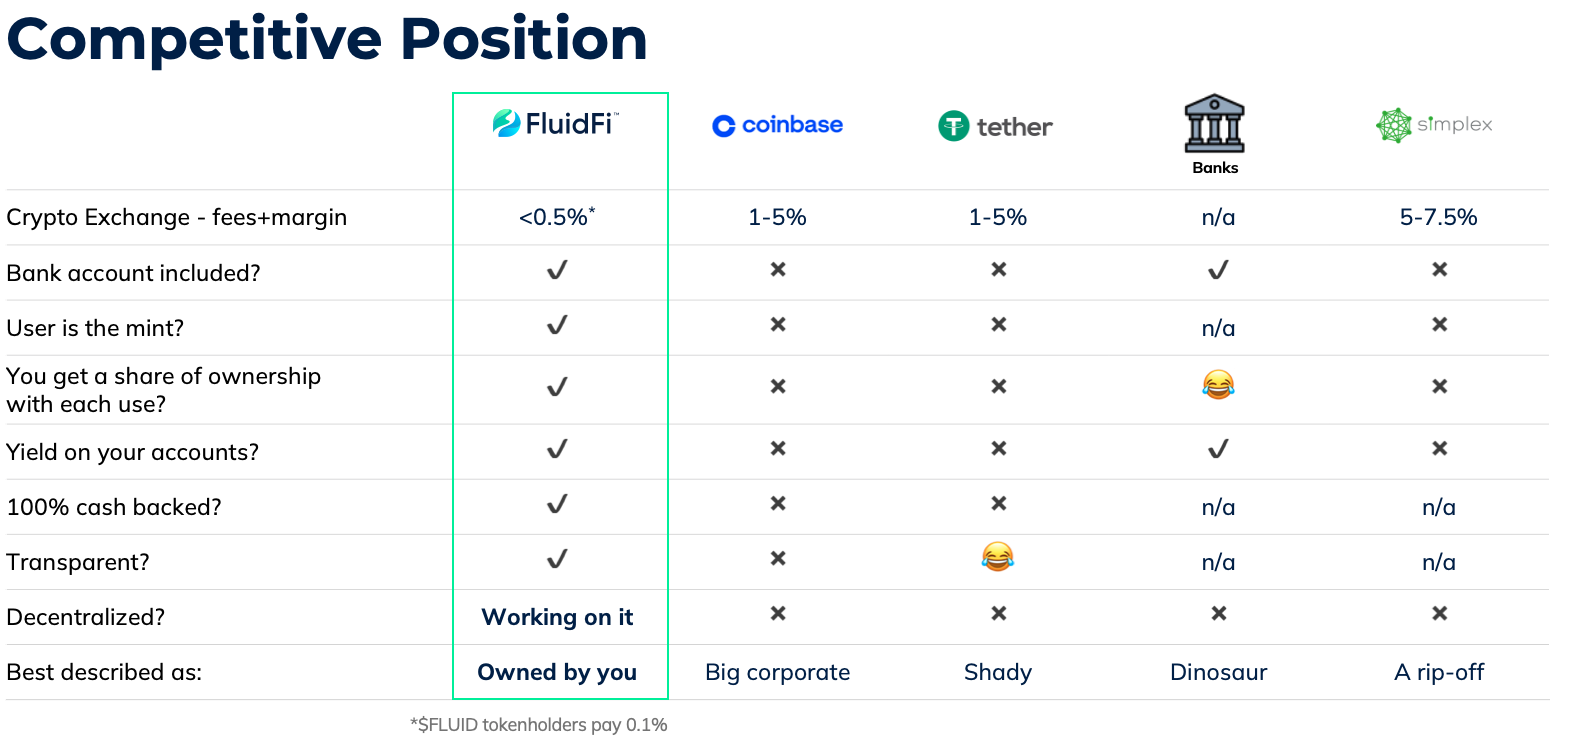 Competitive position of Fluidfi compared to Coinbase, Tether, Banks and Simplex.